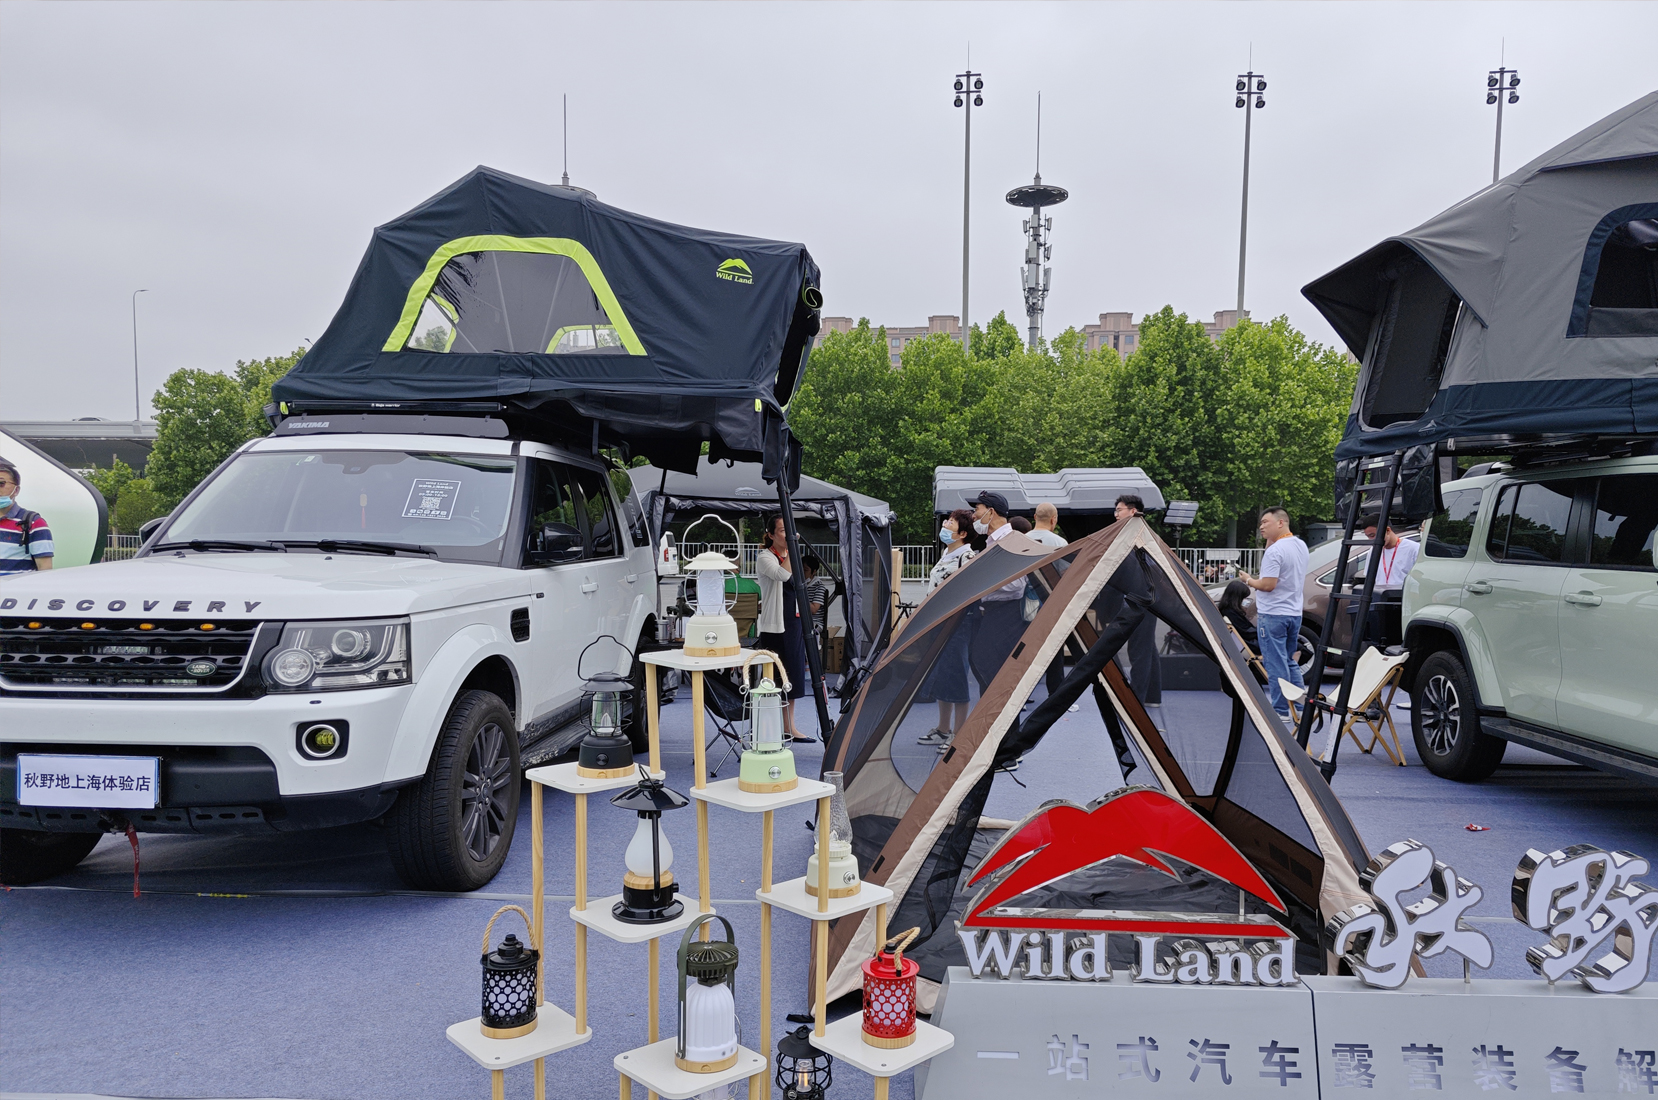 Camping never ends, Wild Land ignites the Shanghai International RV & Camping Exhibition.